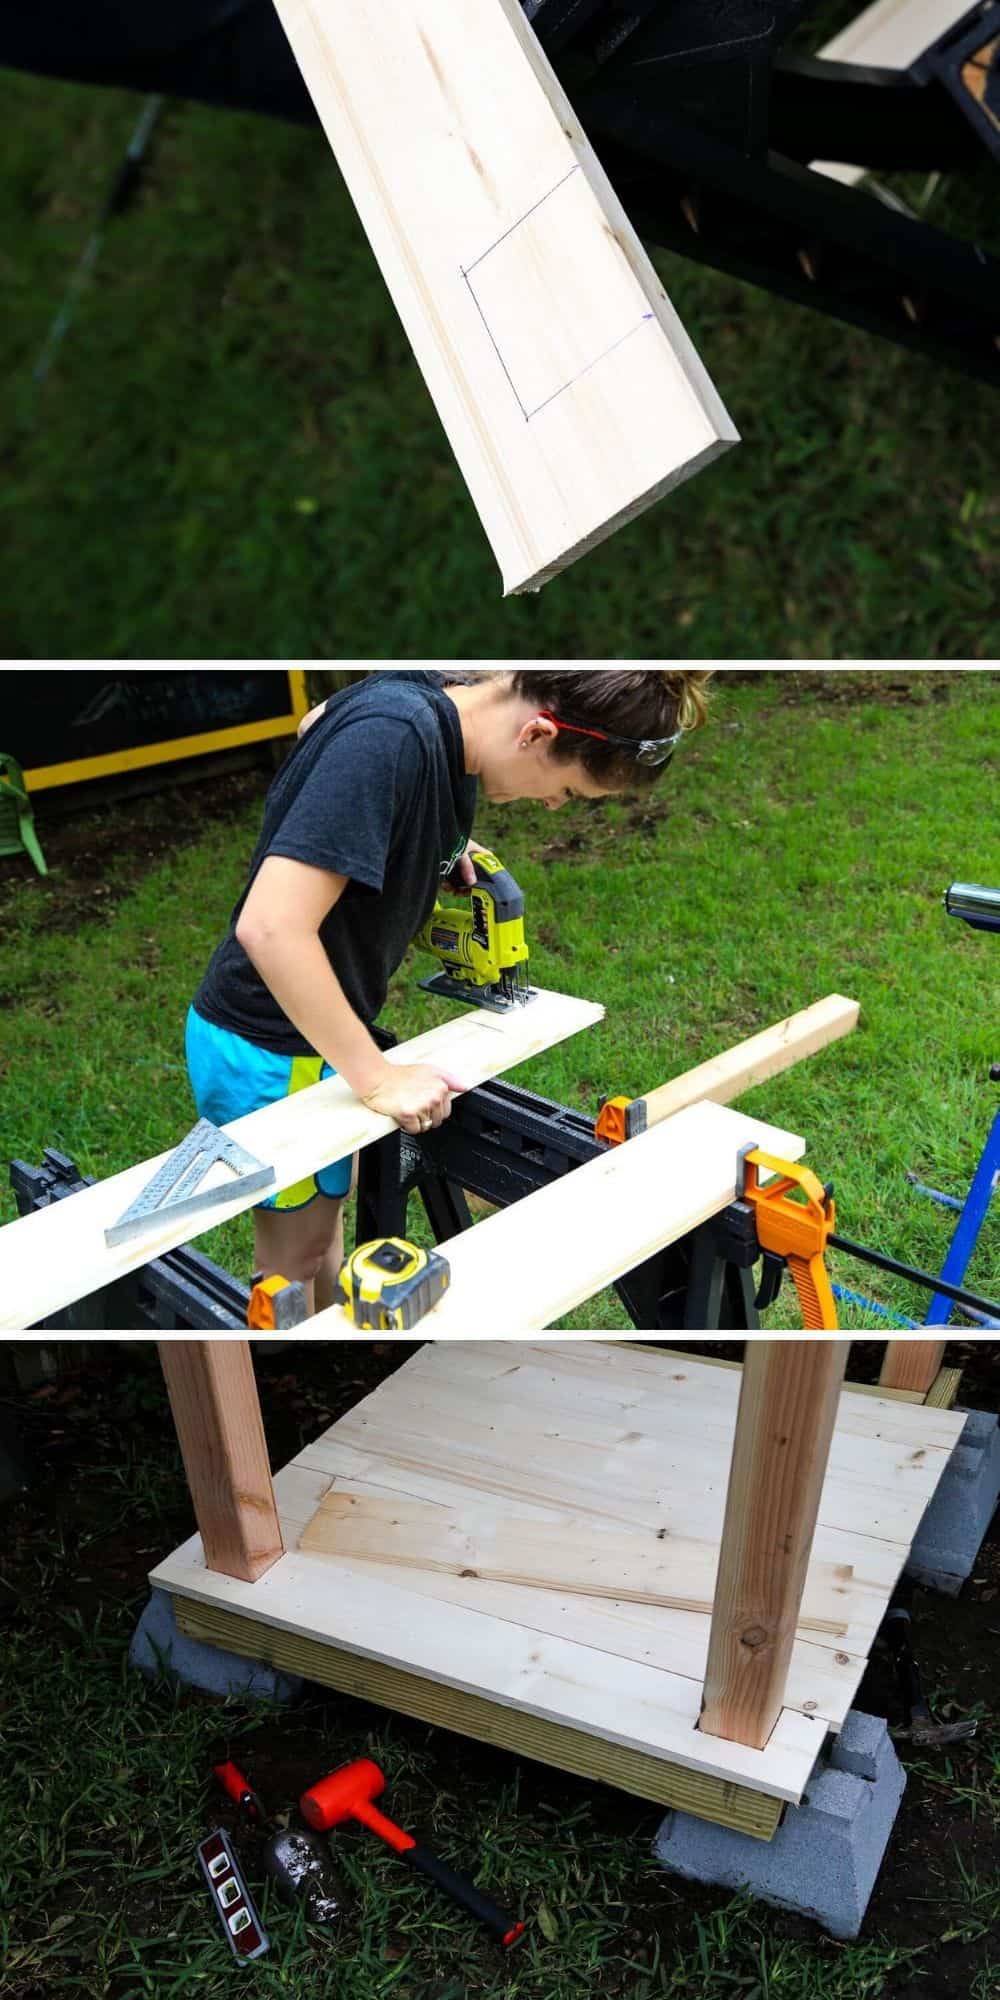 collage of close up images of a woman installing flooring in a DIY outdoor playhouse